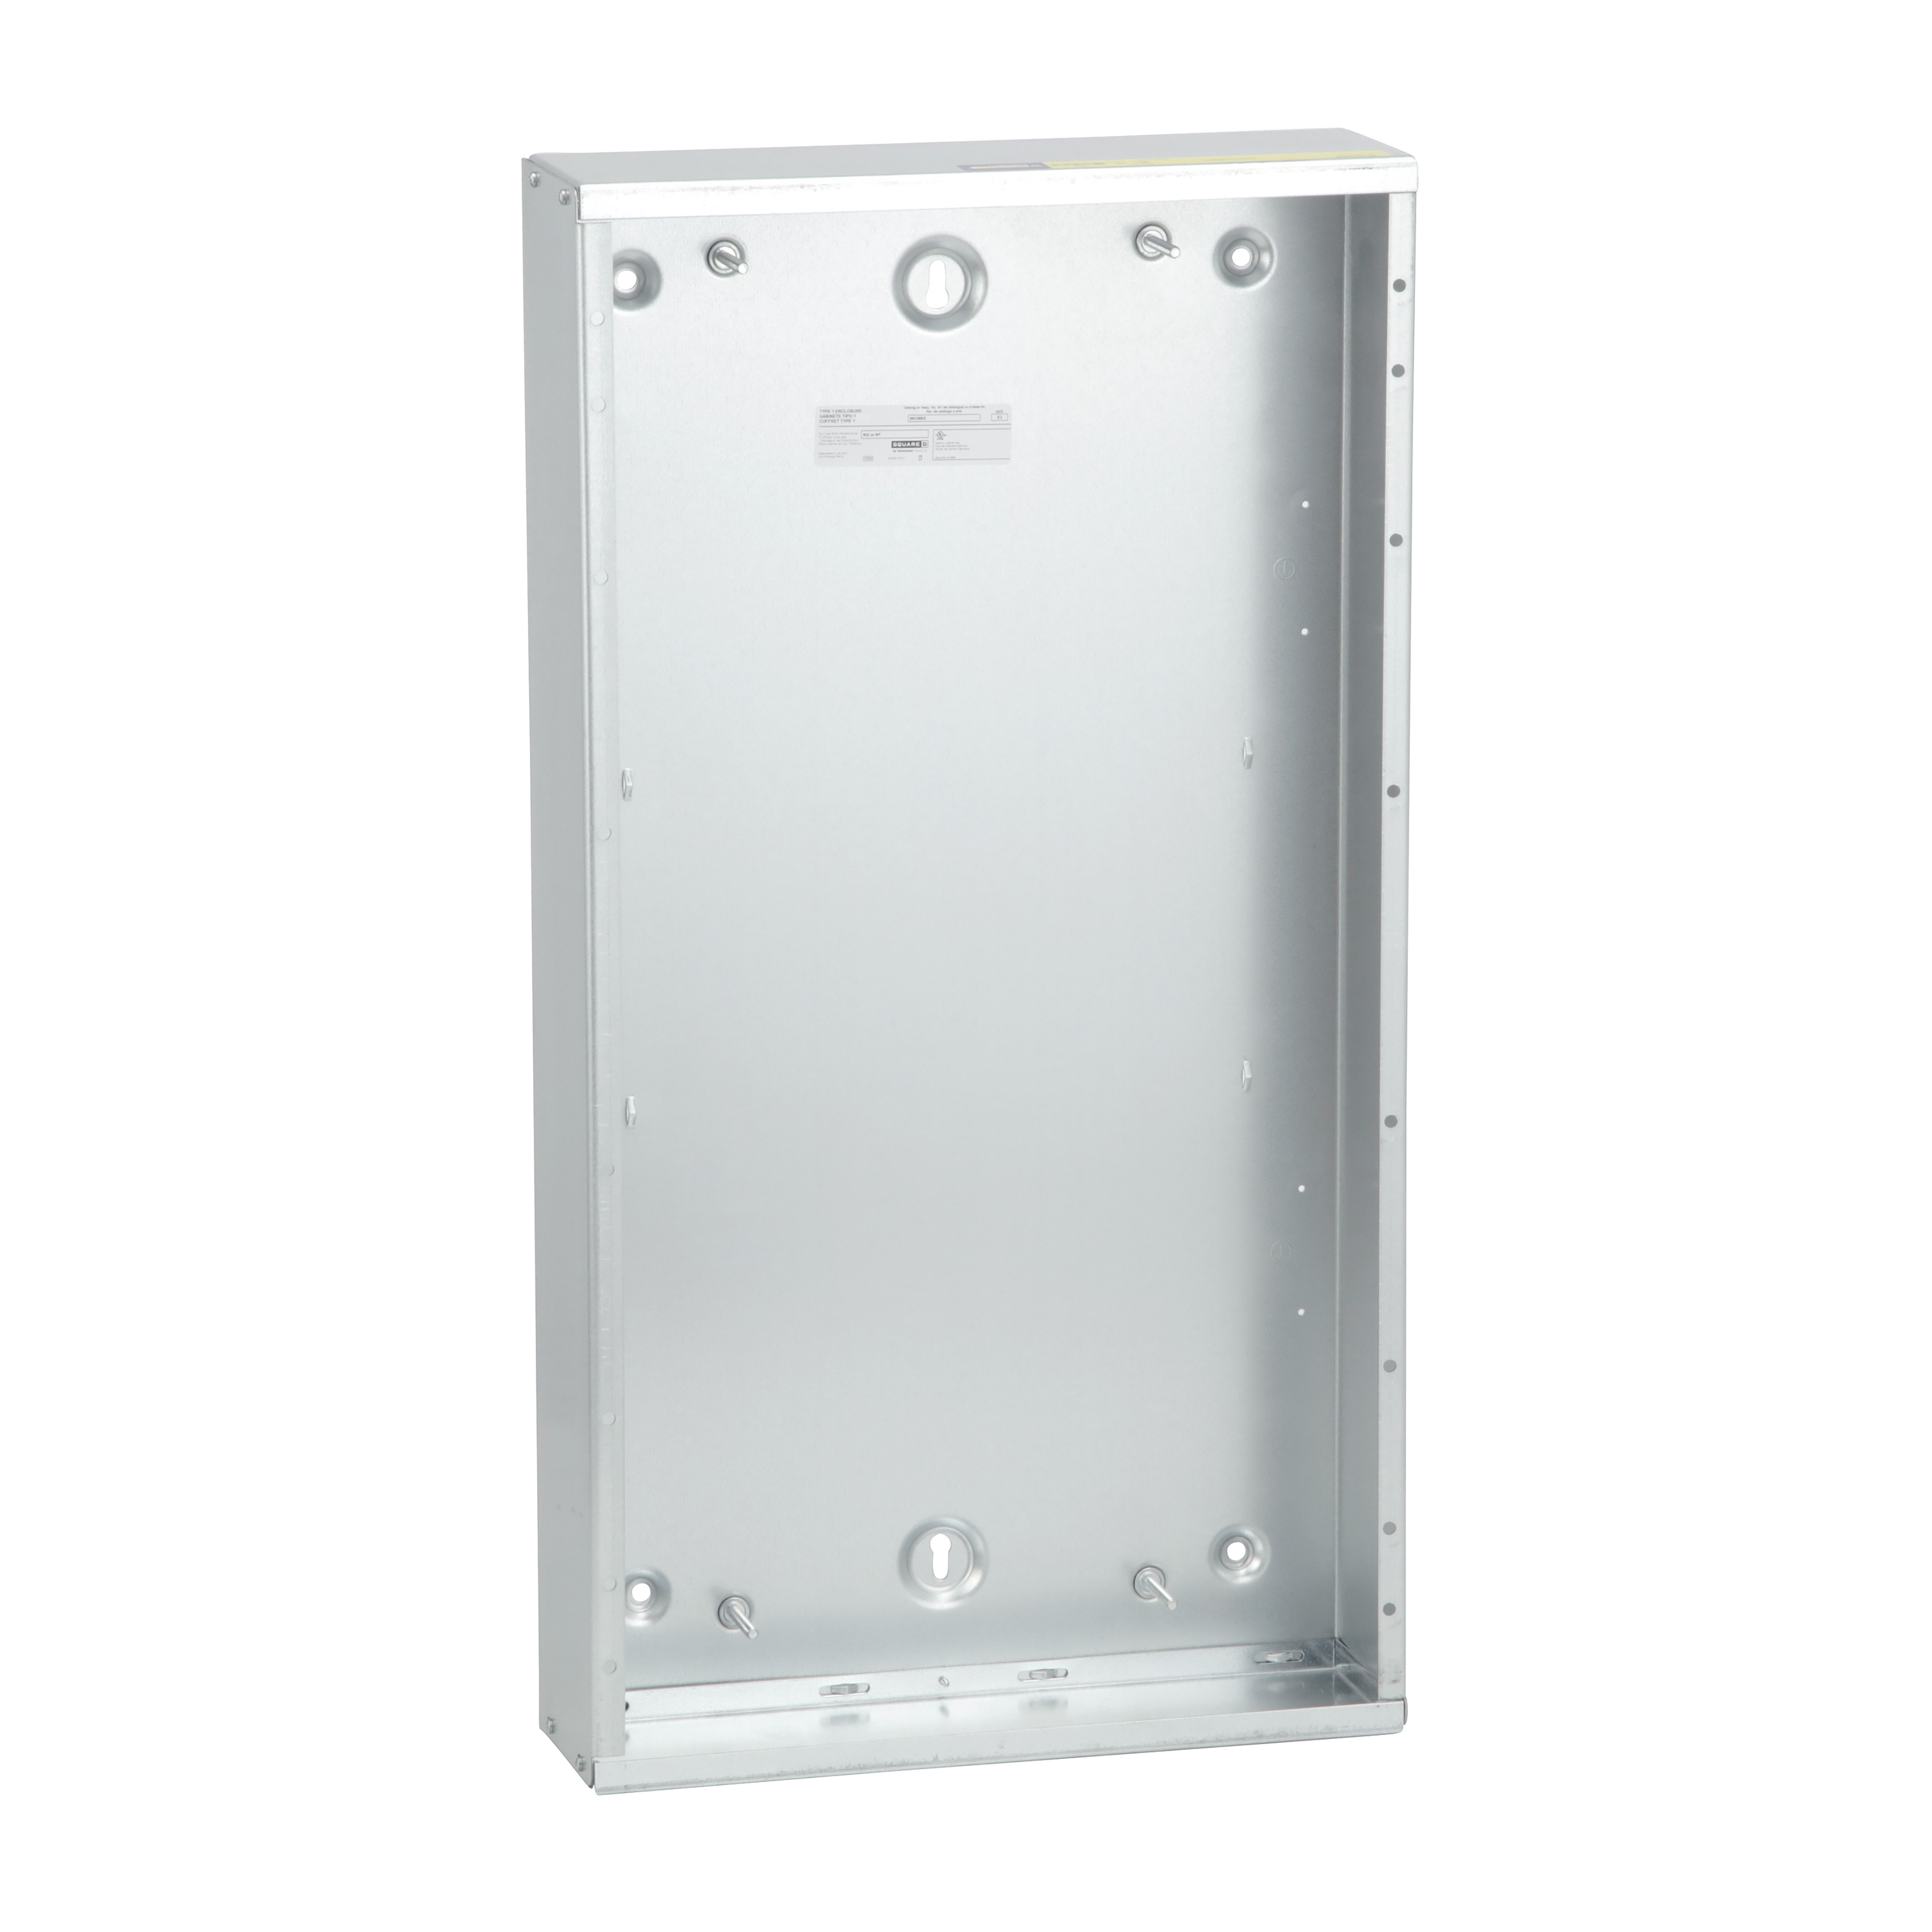 Enclosure box, NQ and NF panelboards, NEMA 1, blank end walls, 20in W x 38in H x 5.75in D